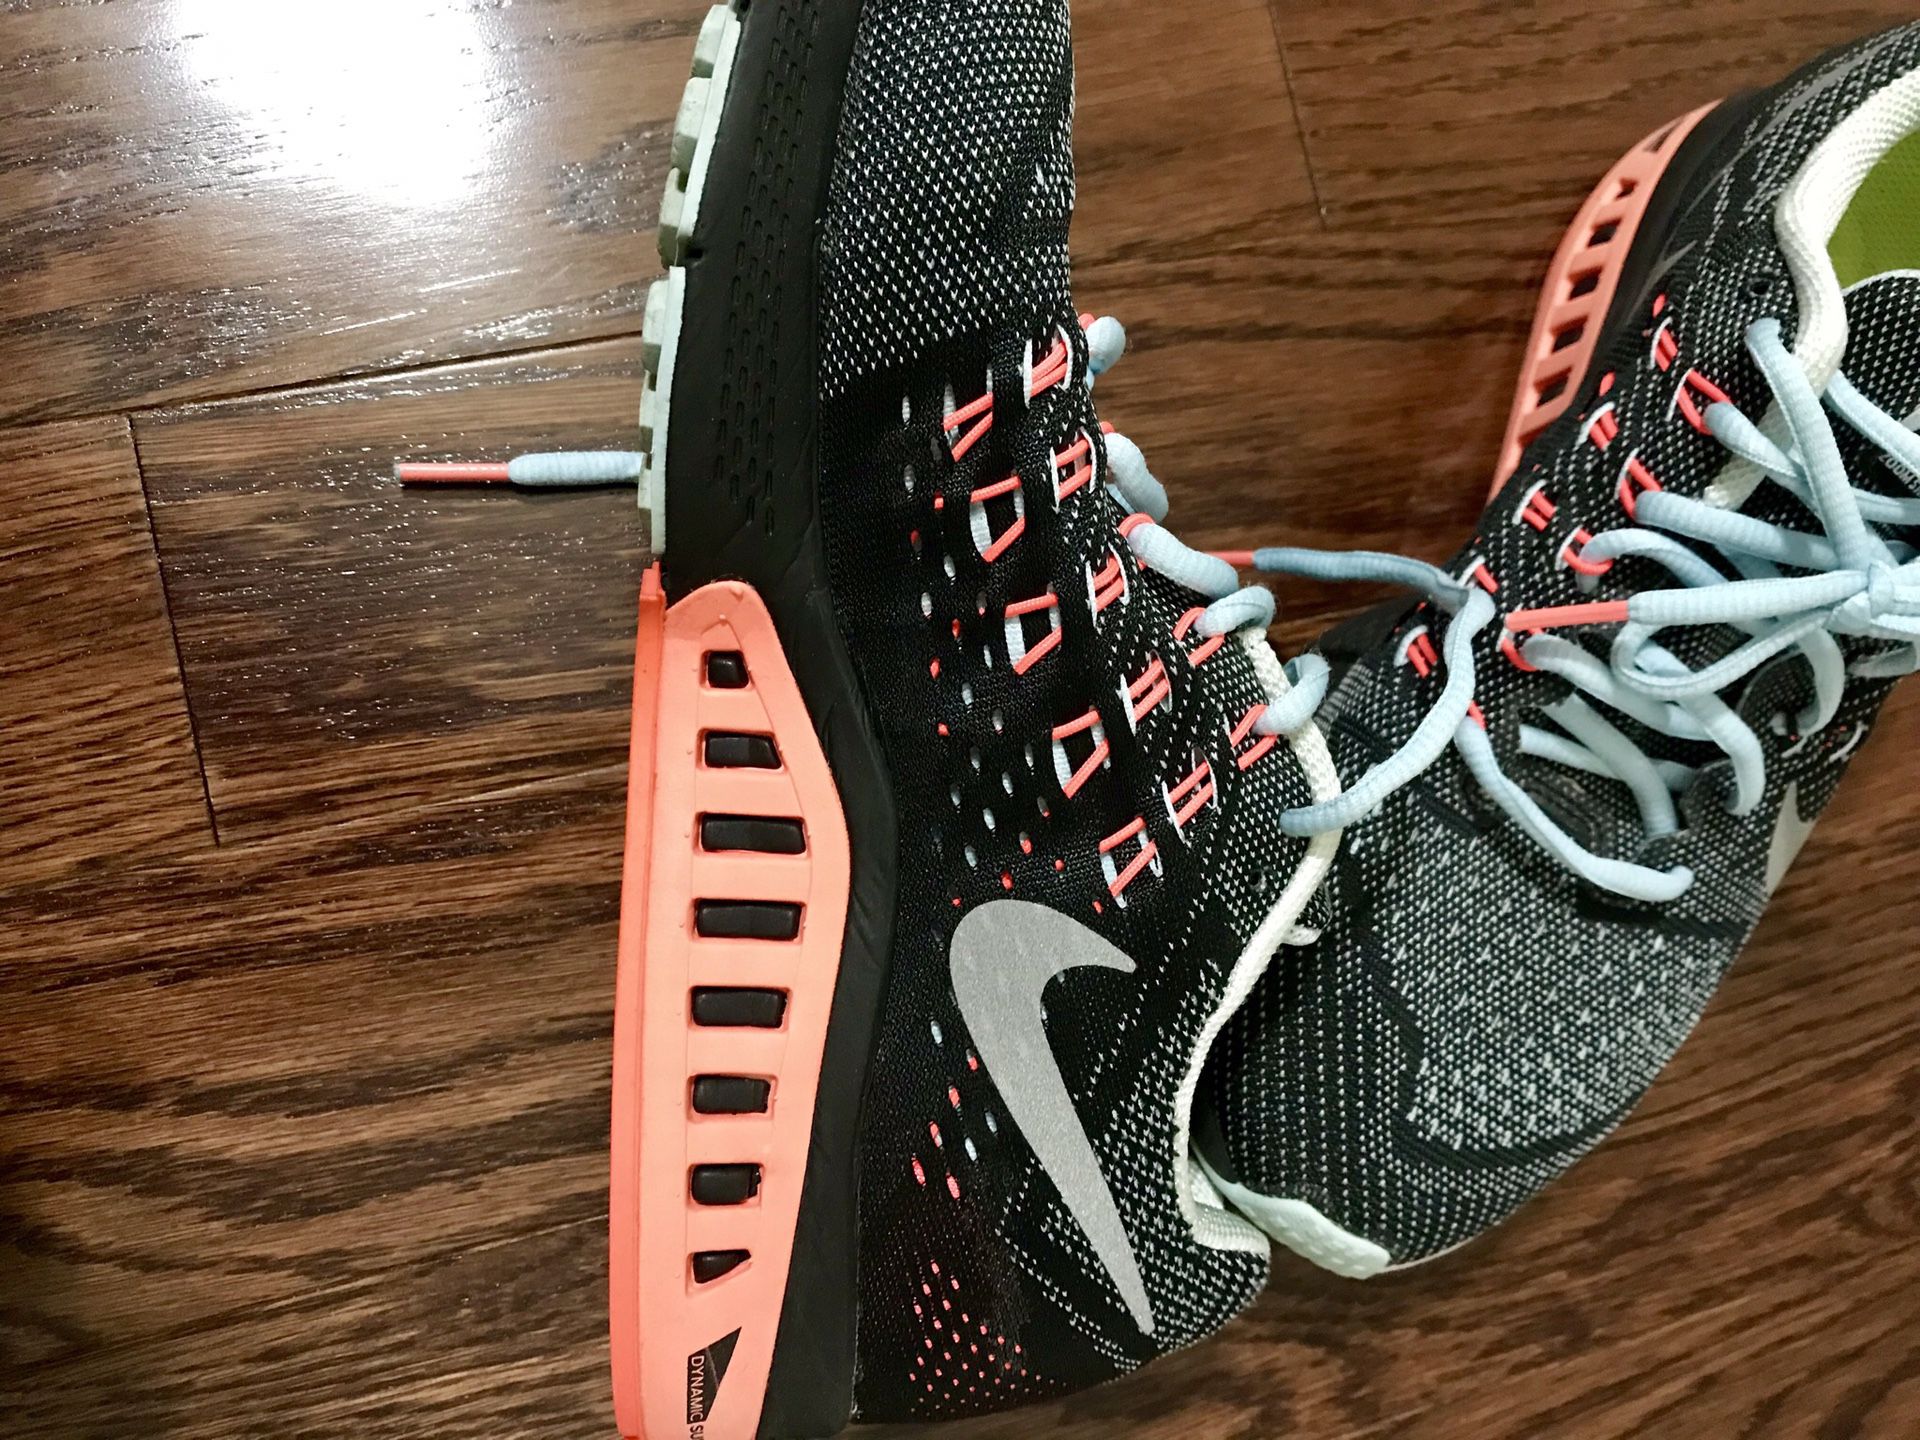 varkensvlees verbanning salade Nike Air Zoom Structure 18 Women's Running Shoes for Sale in Naugatuck, CT  - OfferUp